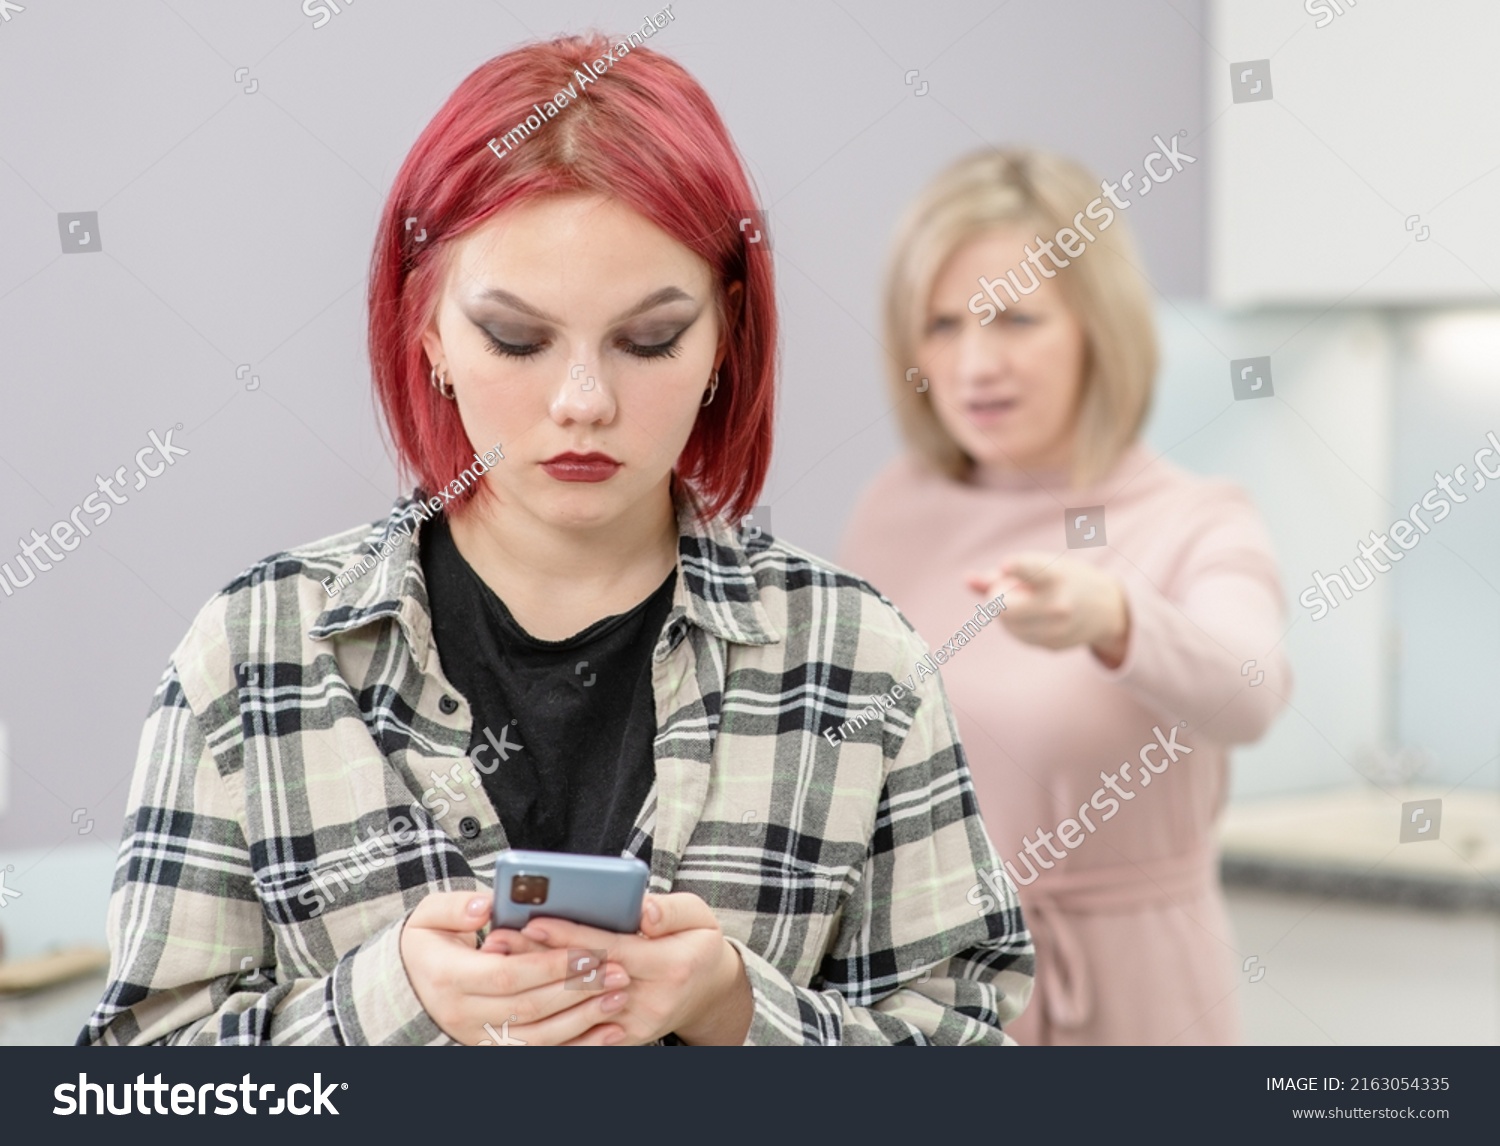 Angry Woman Scolds Her Teenage DaughterẢnh Có Sẵn2163054335 Shutterstock 